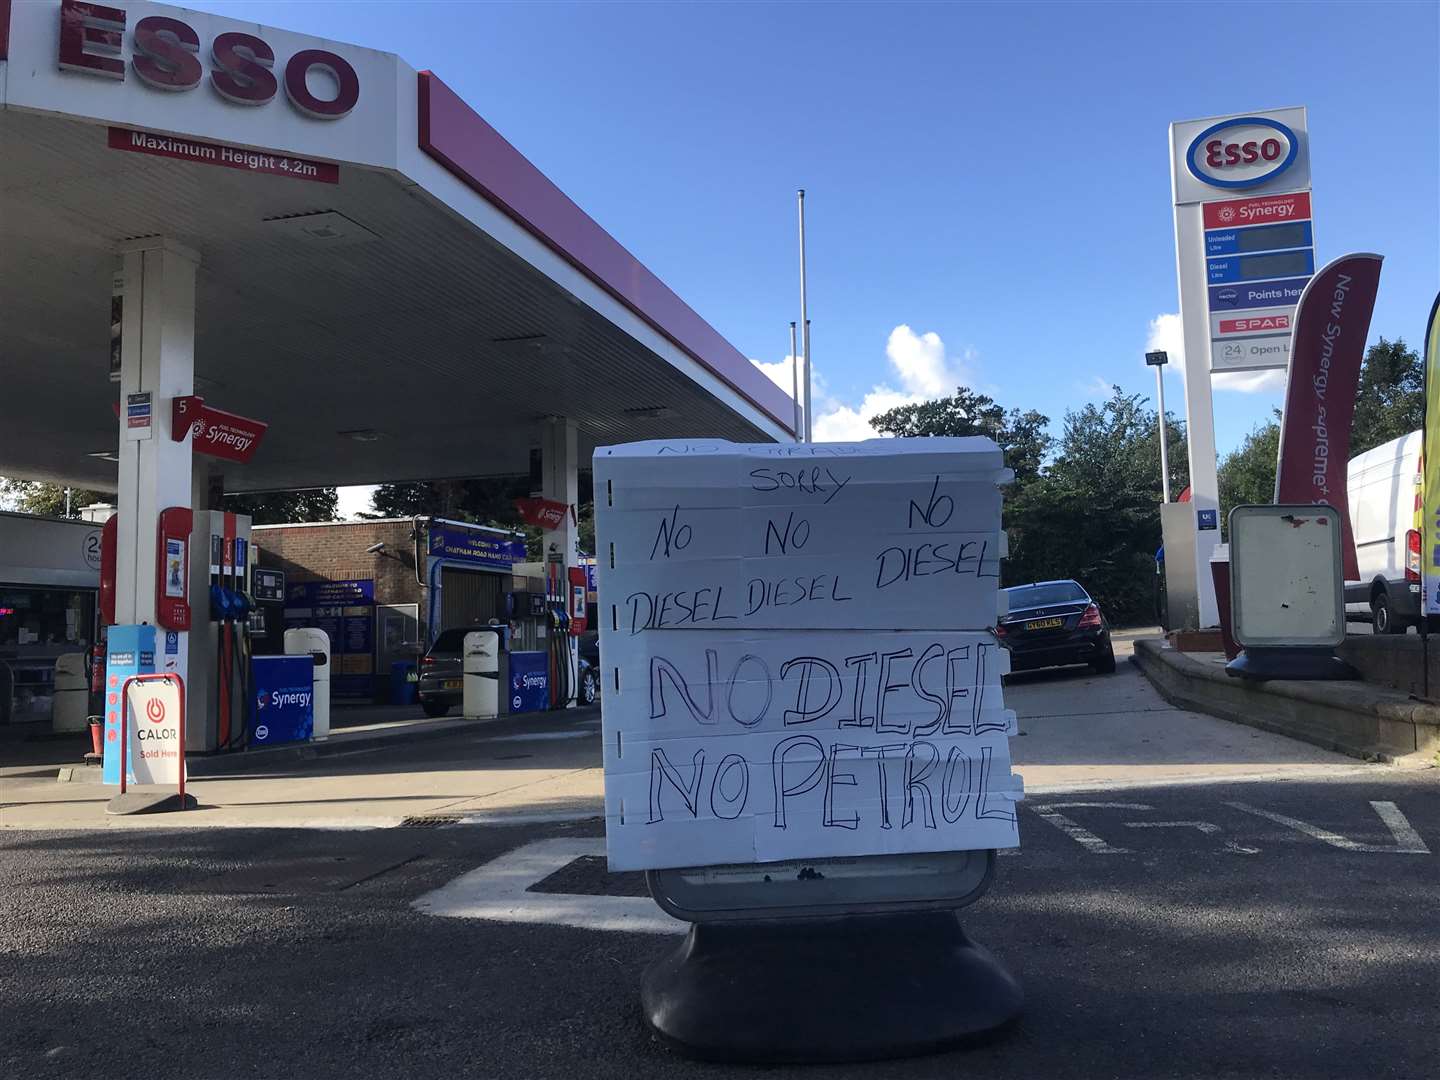 There was no fuel at this Esso petrol station in Maidstone on Wednesday